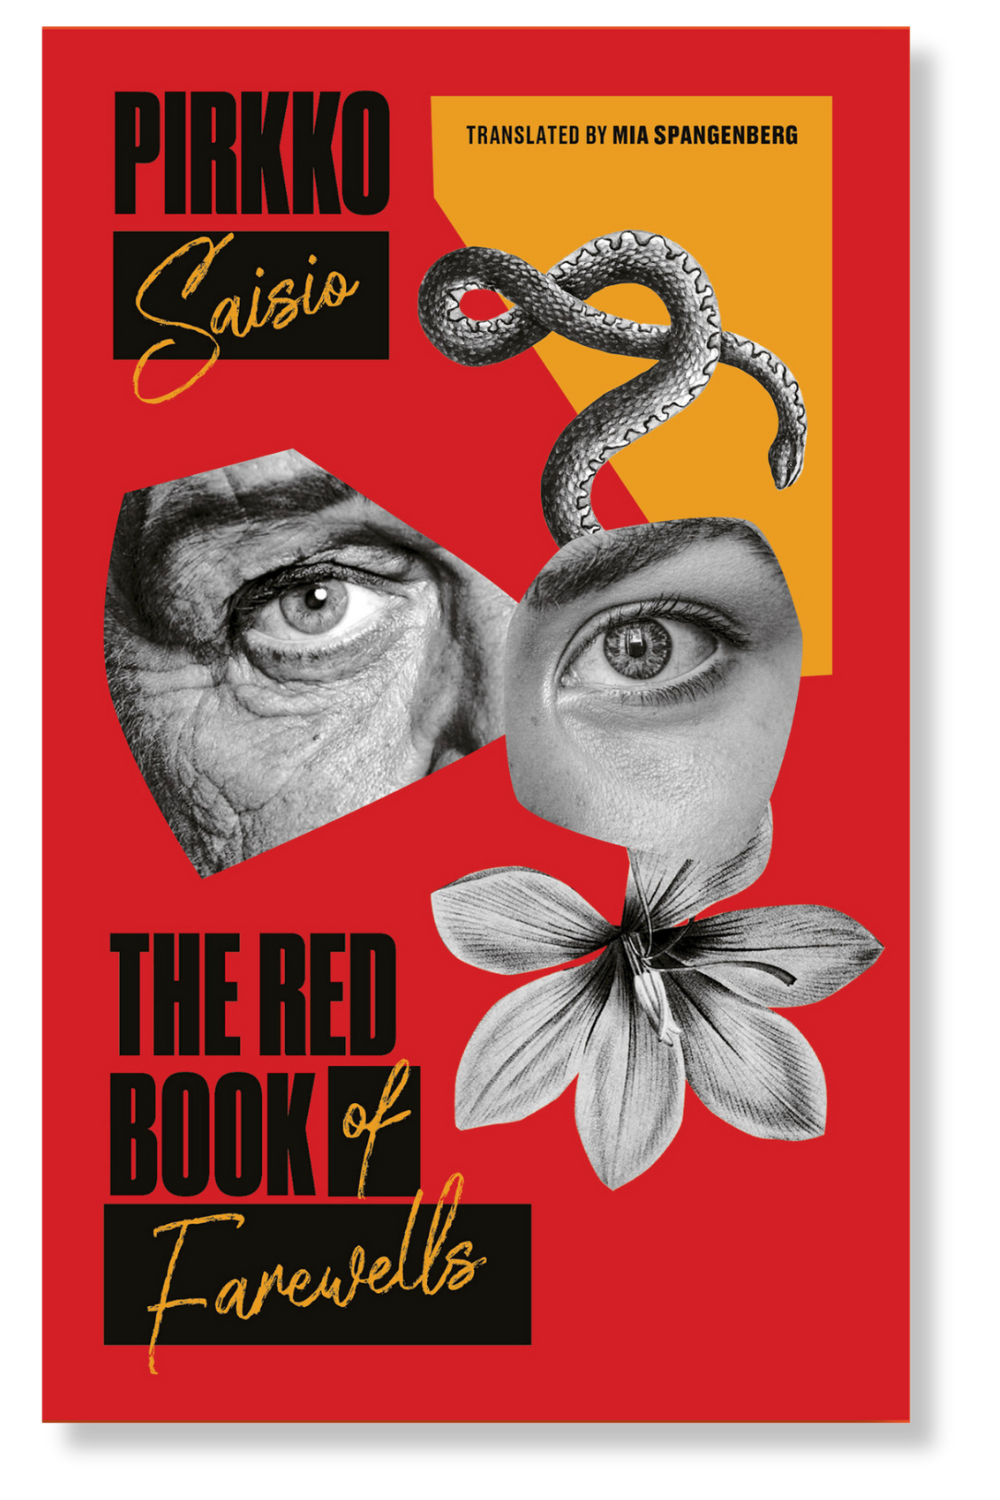 The cover of "The Red Book of Farewells"